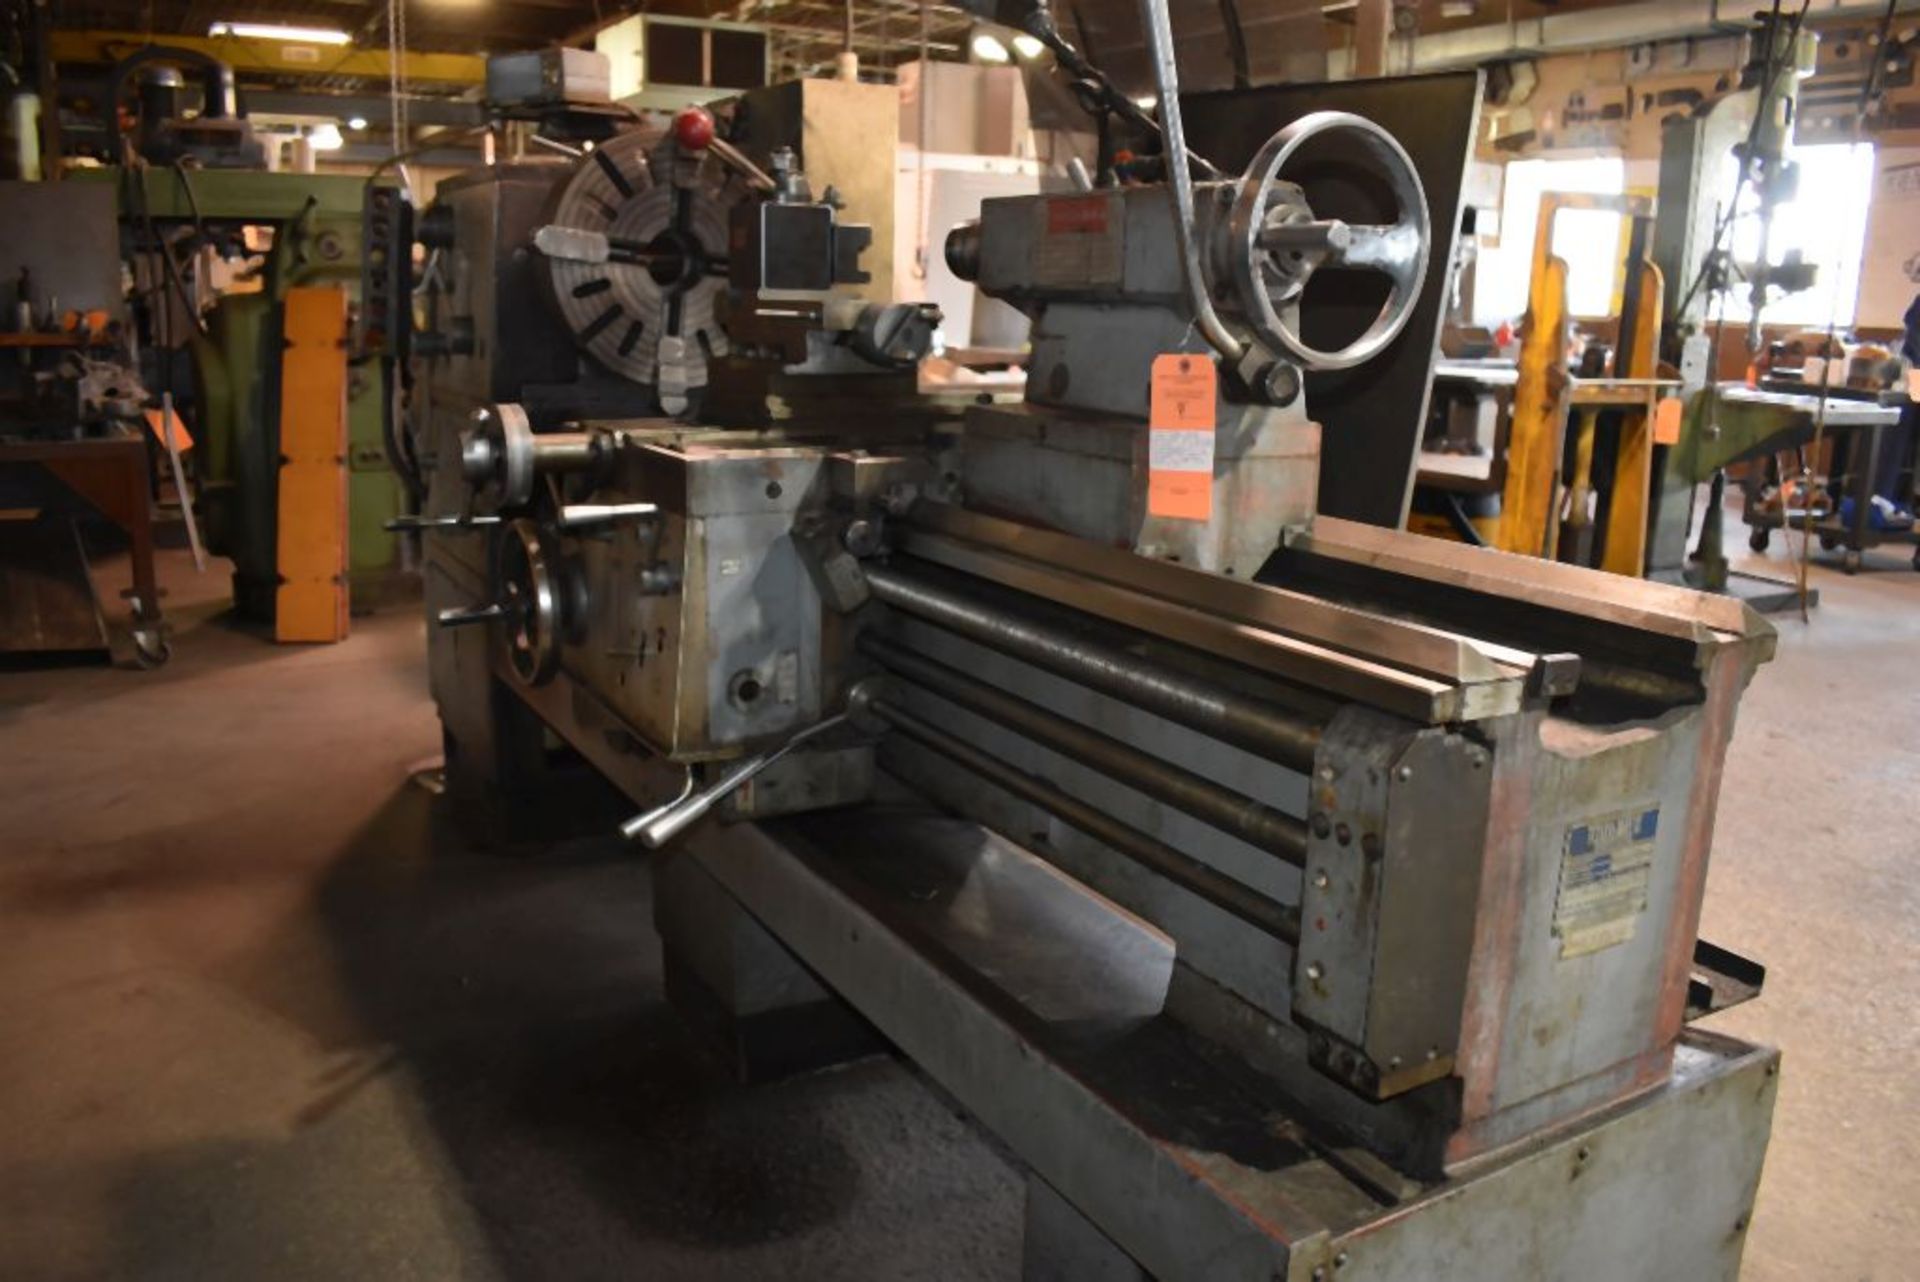 (1989) TOOLMEX (POLAND) ENGINE LATHE, MODEL TUR-630M, S/N: 48494-T, 20" 4-JAW CHUCK, 4" SPINDLE